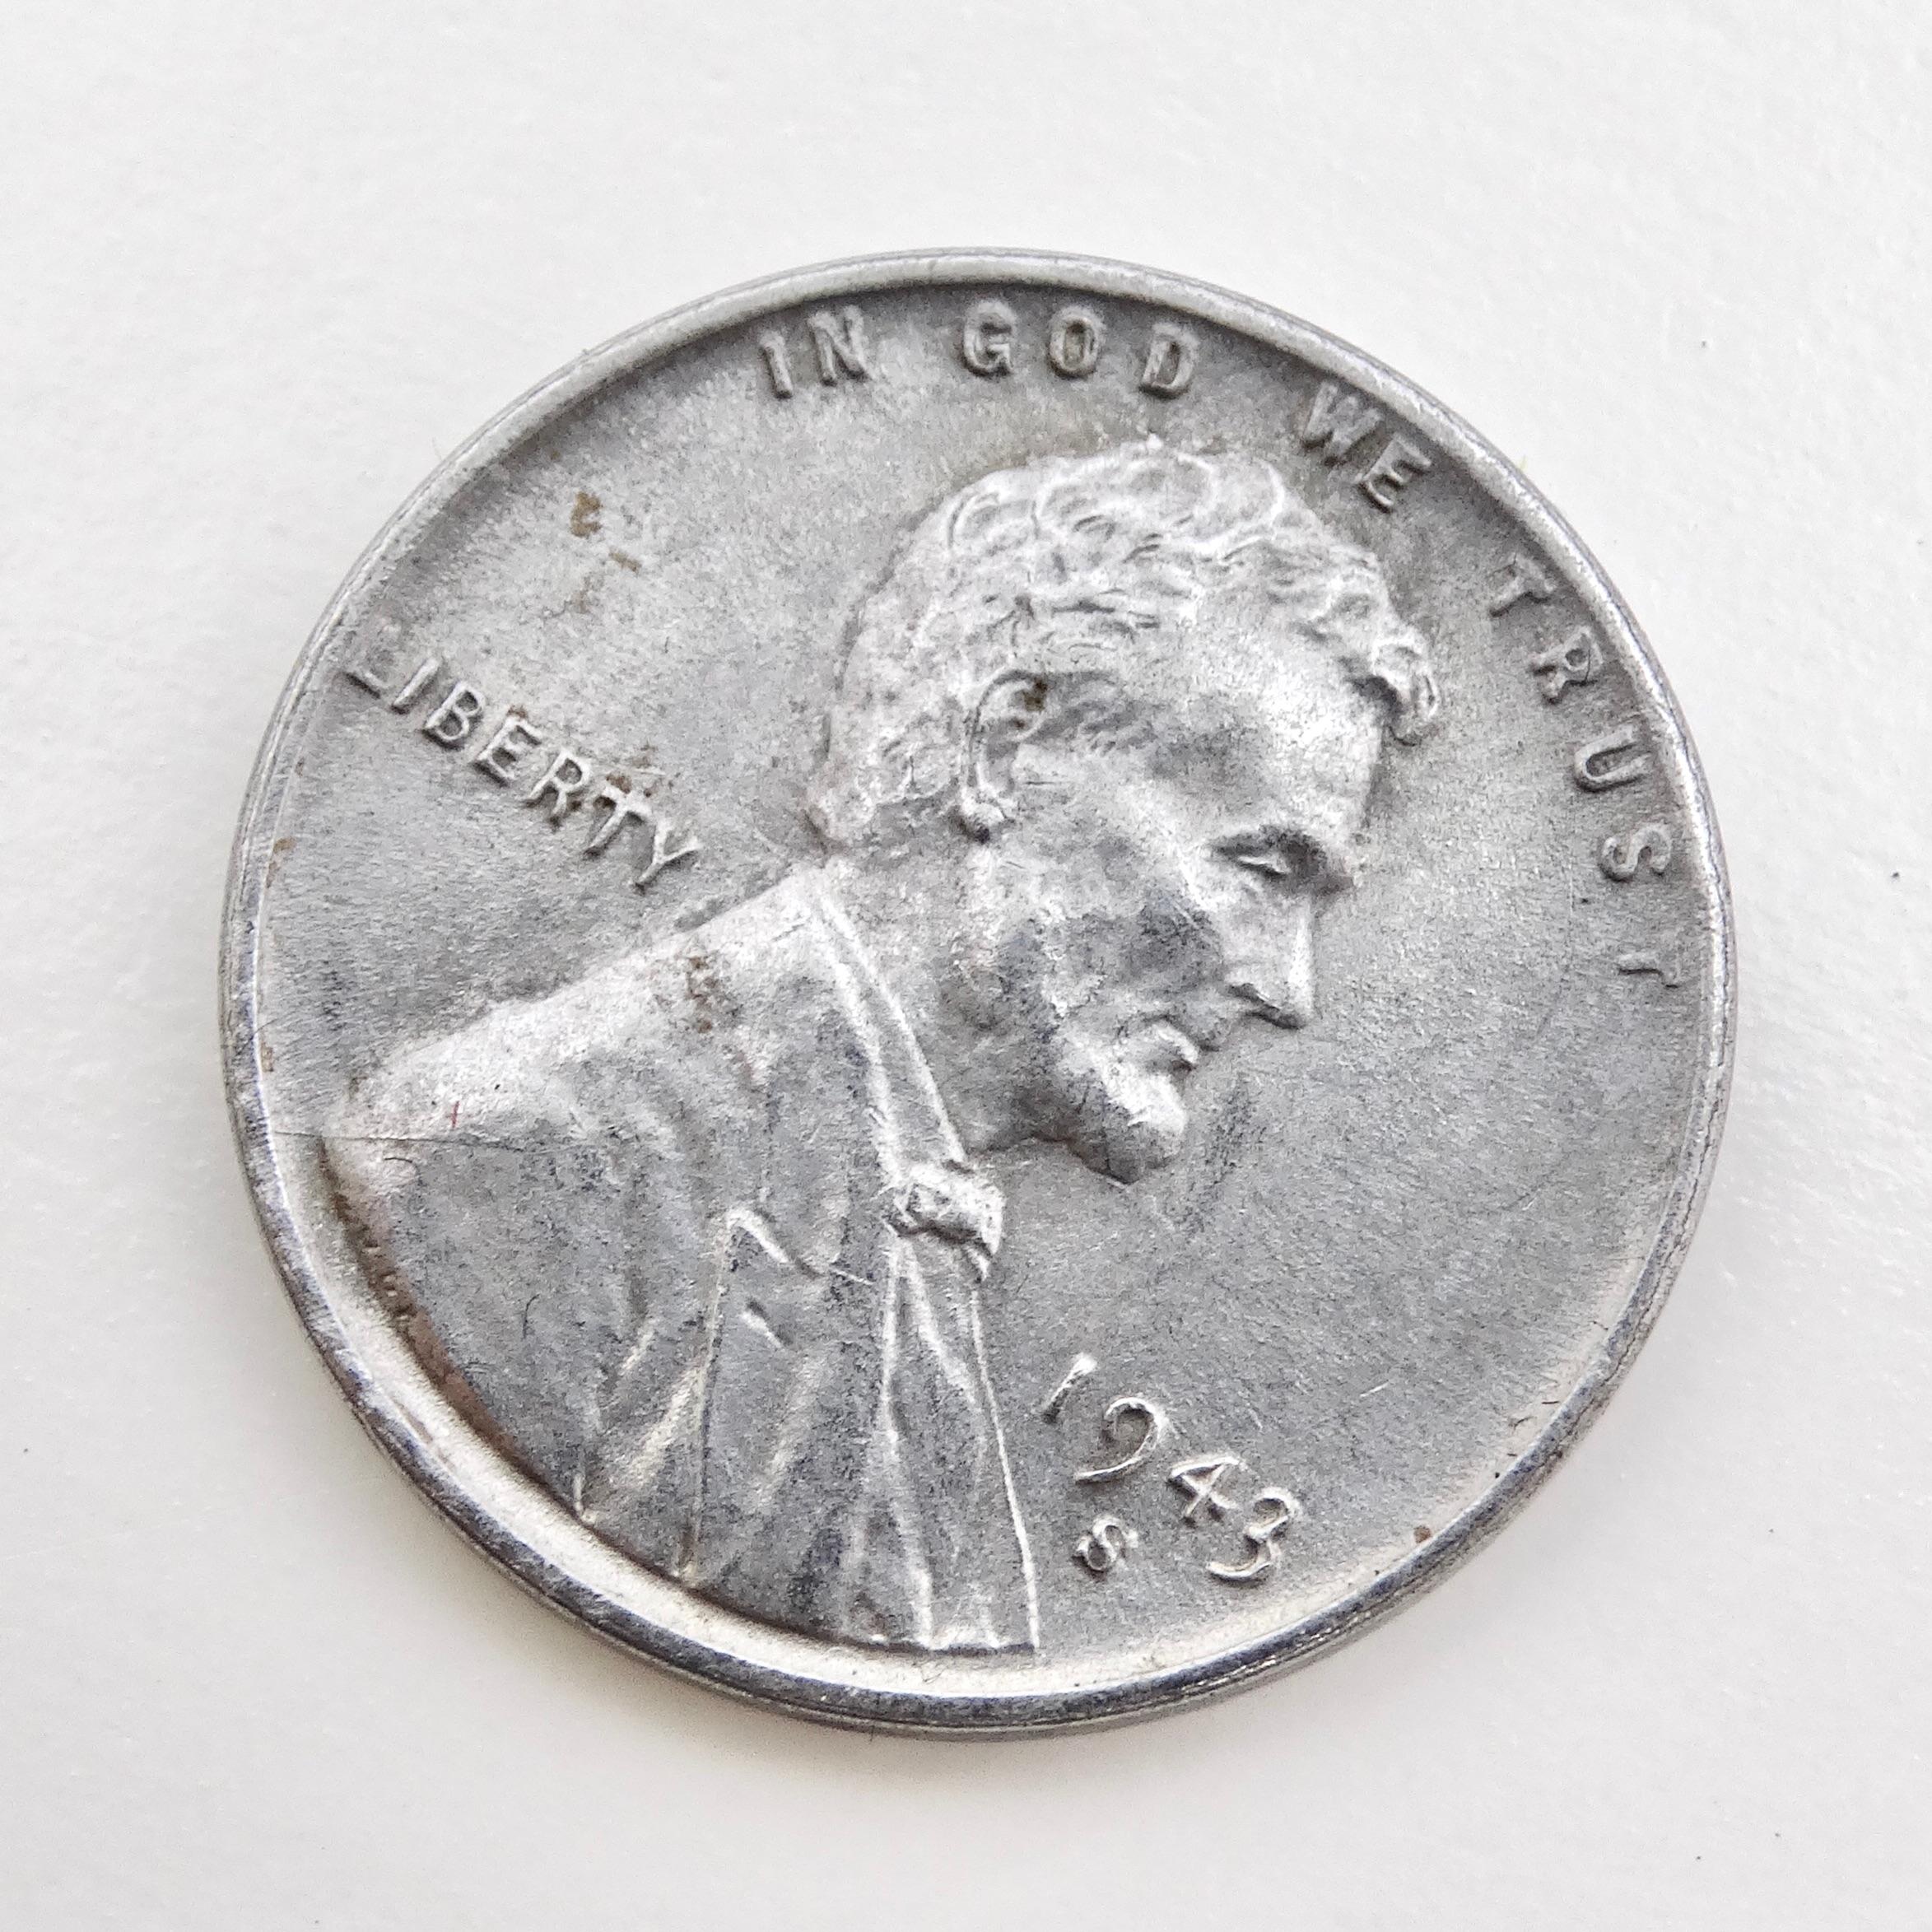 The 1943 Steel Lincoln Cent is a rare and historically significant collector's coin that serves as a tangible reminder of a unique period in American history. During World War II, there was a shortage of copper in the United States, prompting the